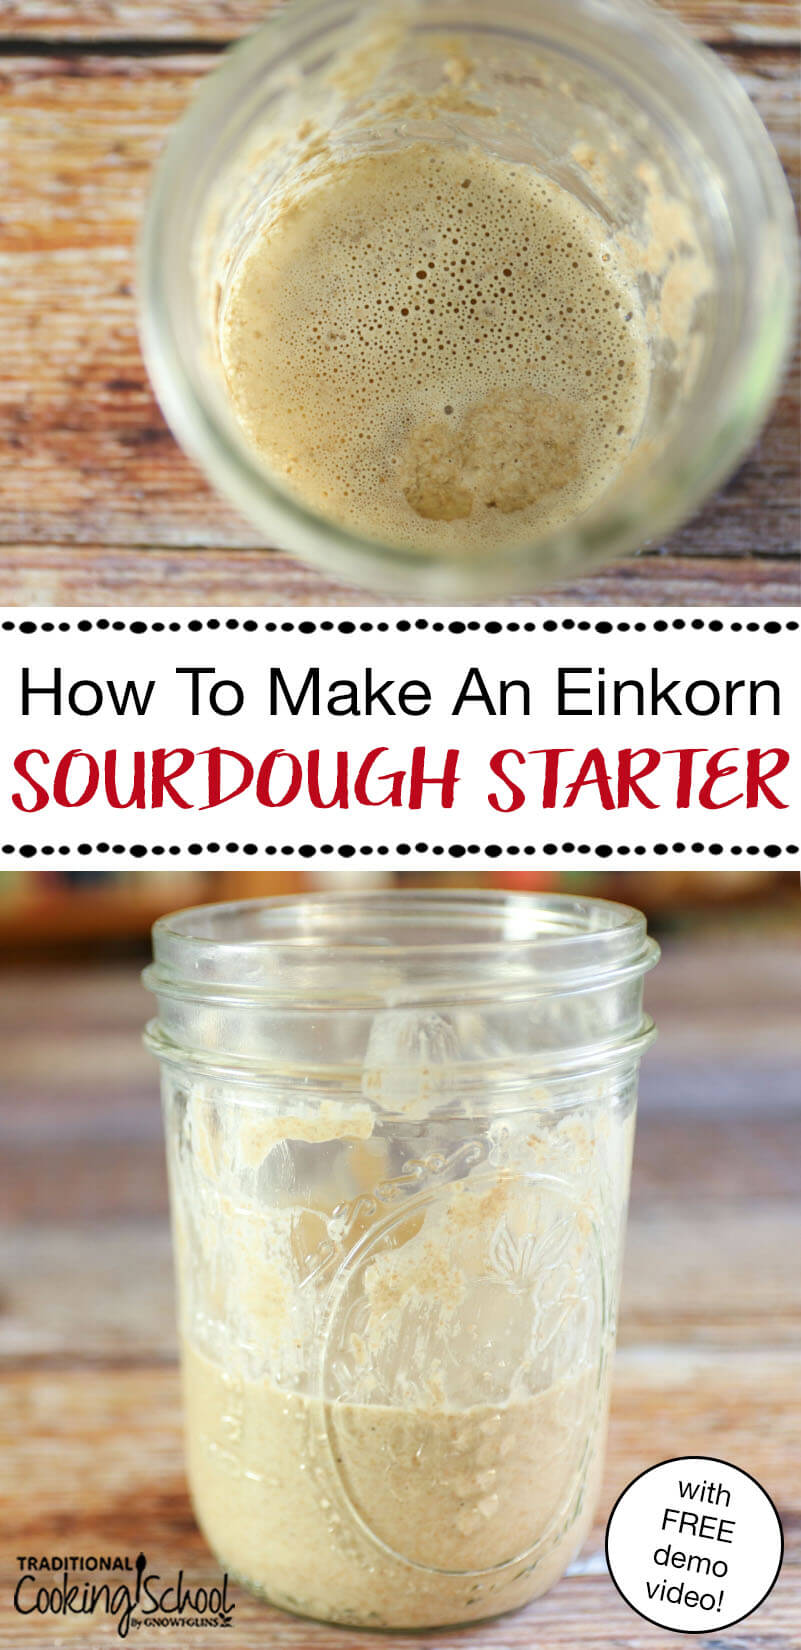 How To Make An Einkorn Sourdough Starter (Video Demo!) | Combine the power of sourdough with the health of einkorn -- a healthy 5,000-year-old variety of wheat -- and you've got all you need for delicious, easily digestible breads, cinnamon rolls, bagels, and more! Find out why I love sourdough so much, and then I'll show you how you can start your own einkorn sourdough starter! | TraditionalCookingSchool.com